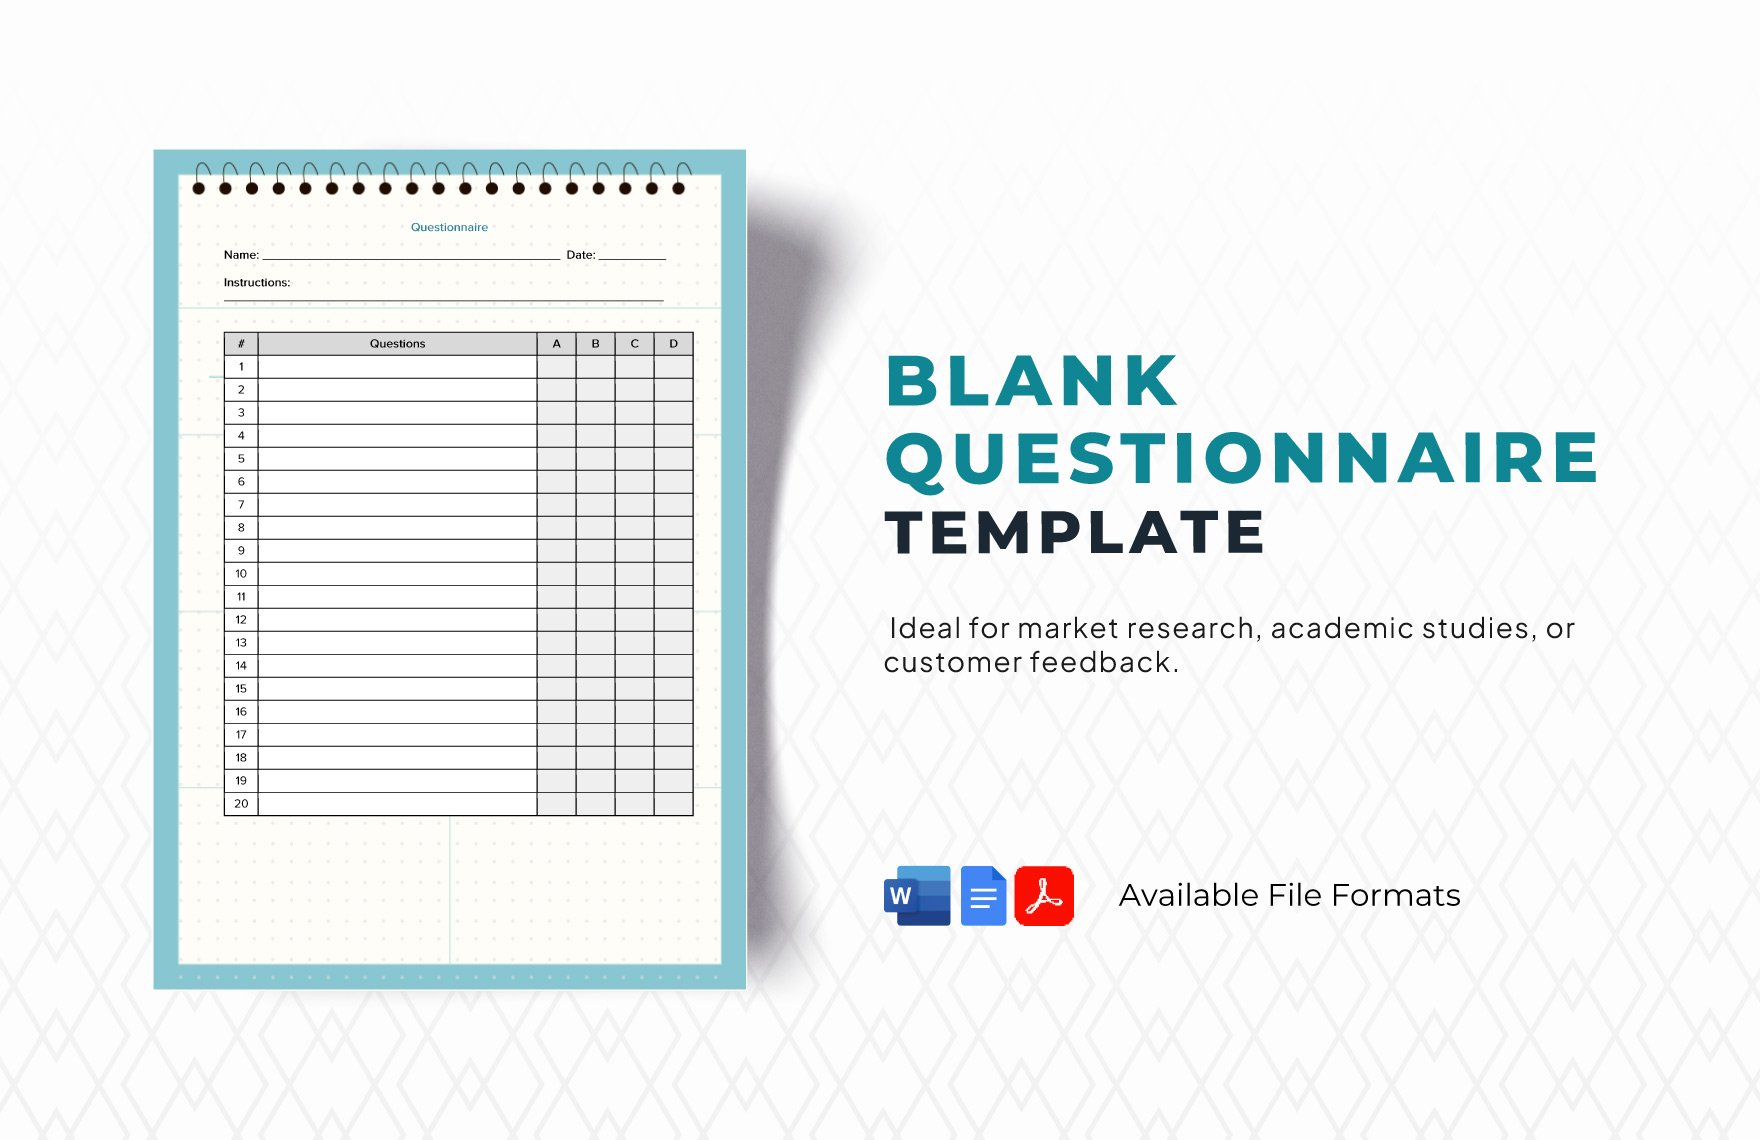 Free Blank Questionnaire Template in Word, Google Docs, PDF